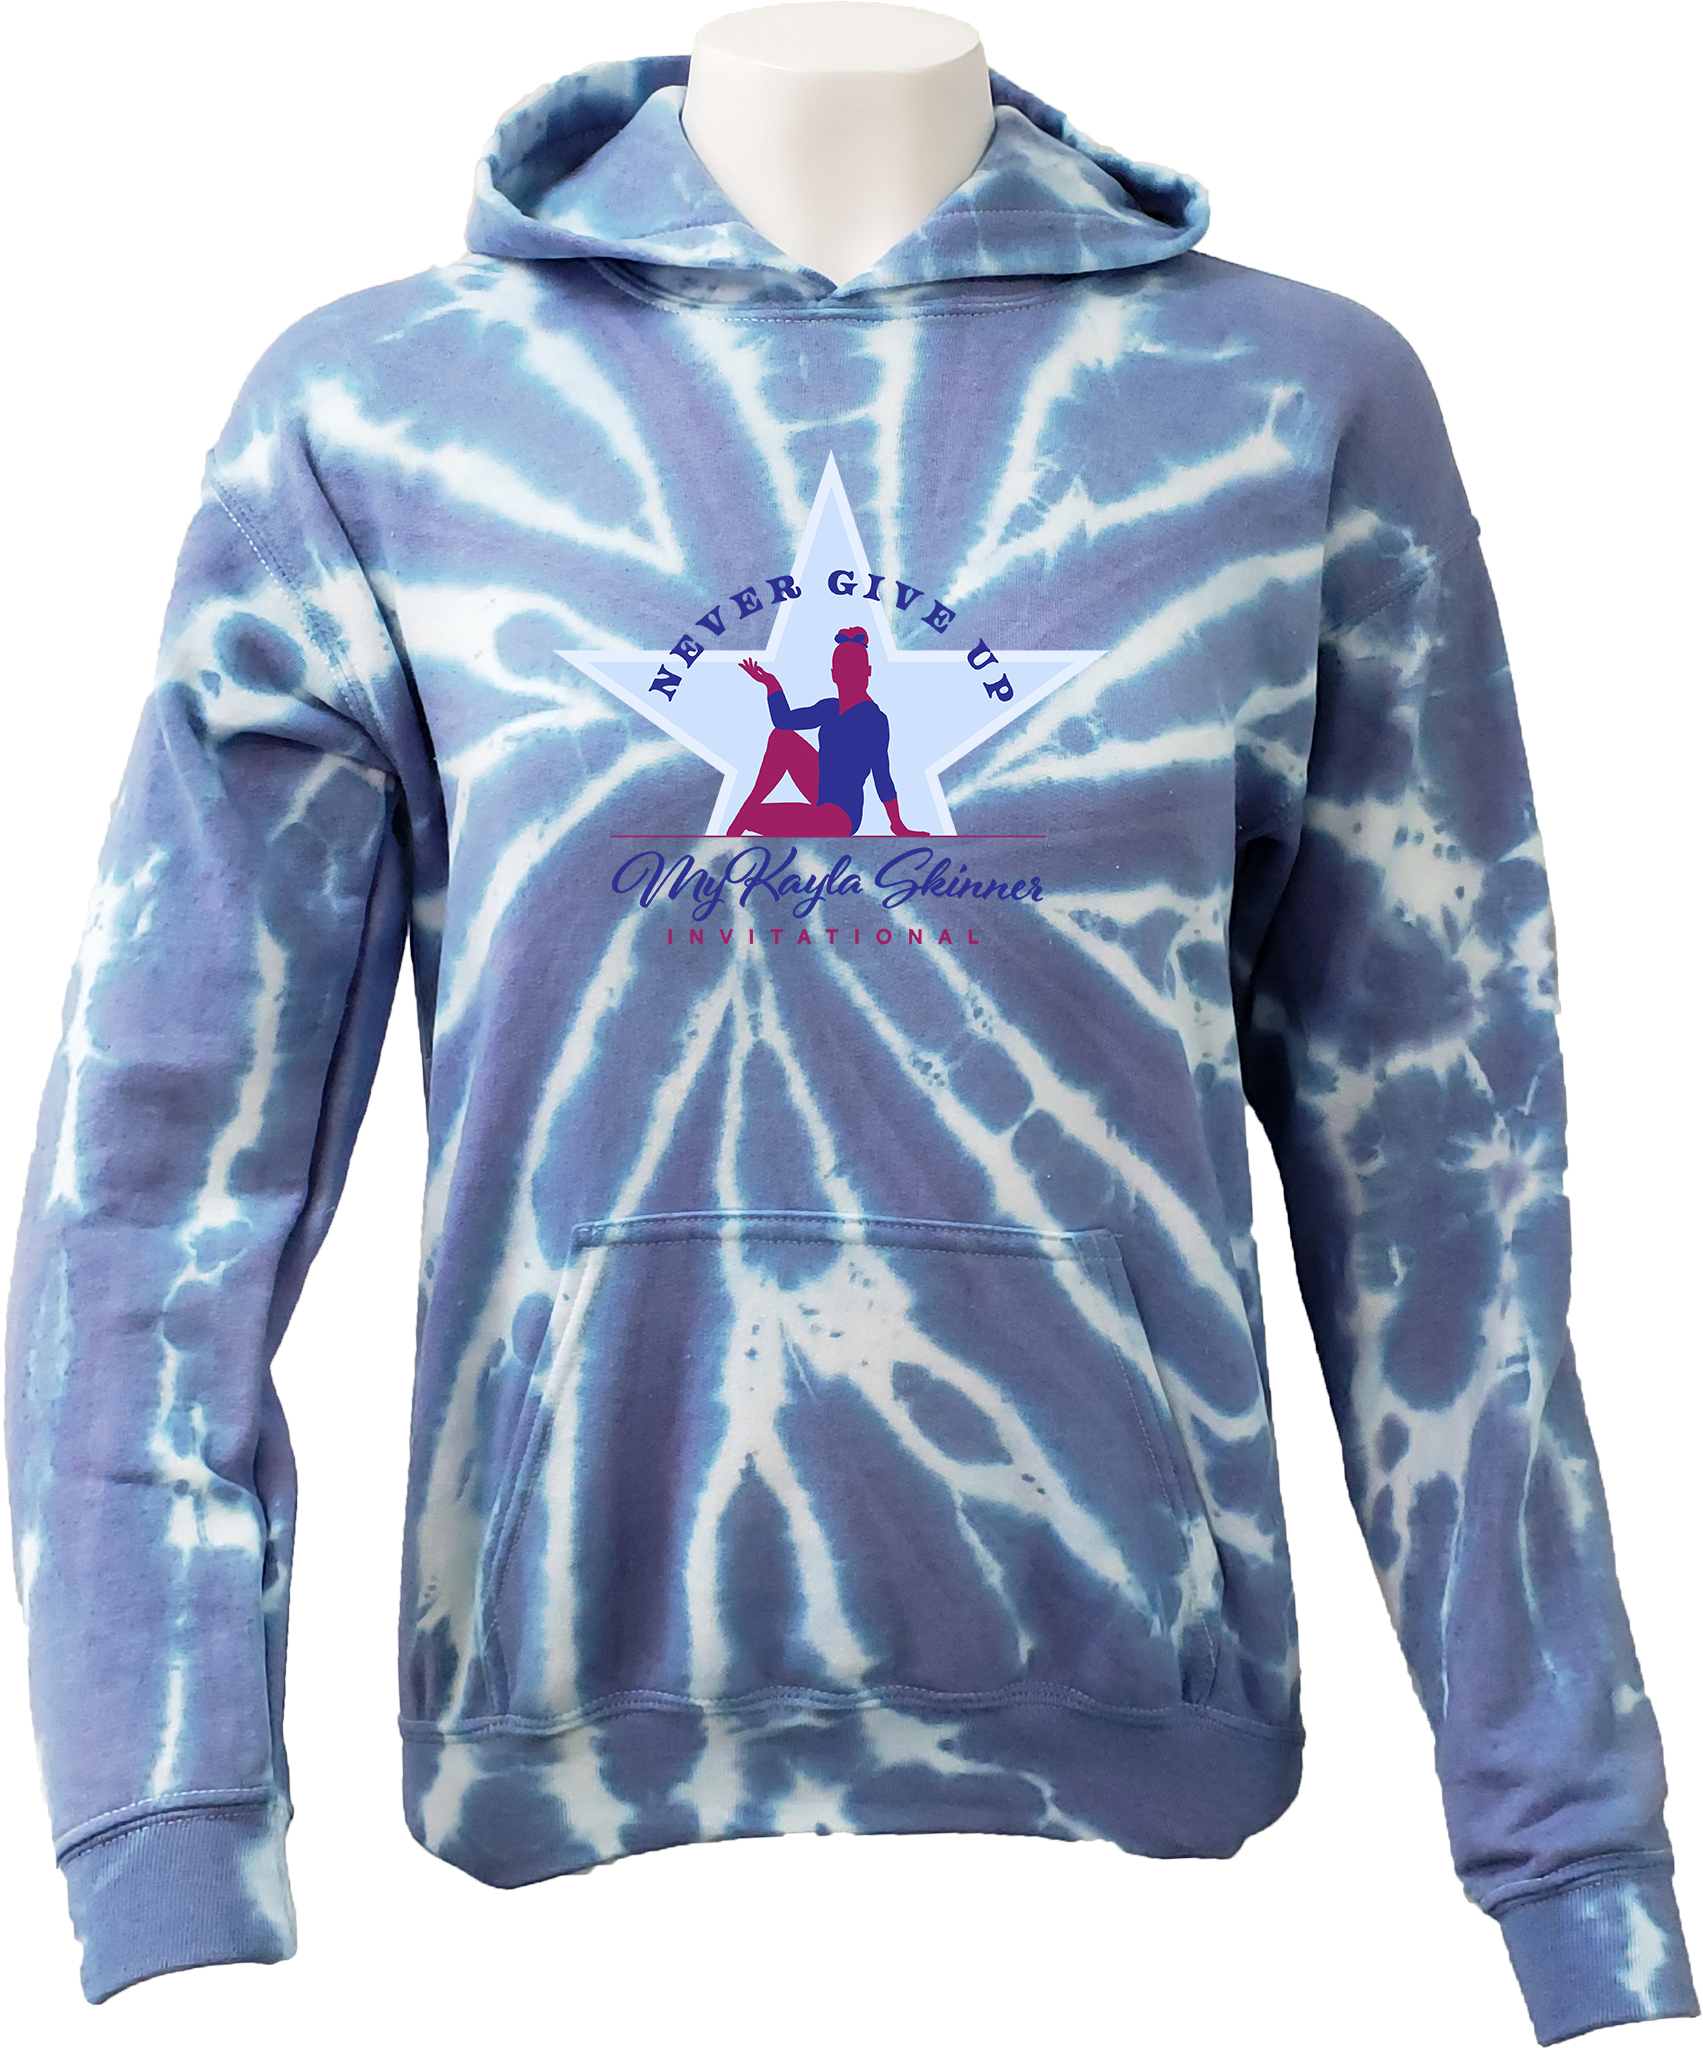 Tie-Dye Hoodies - 2024 Never Give Up with MyKayla Skinner